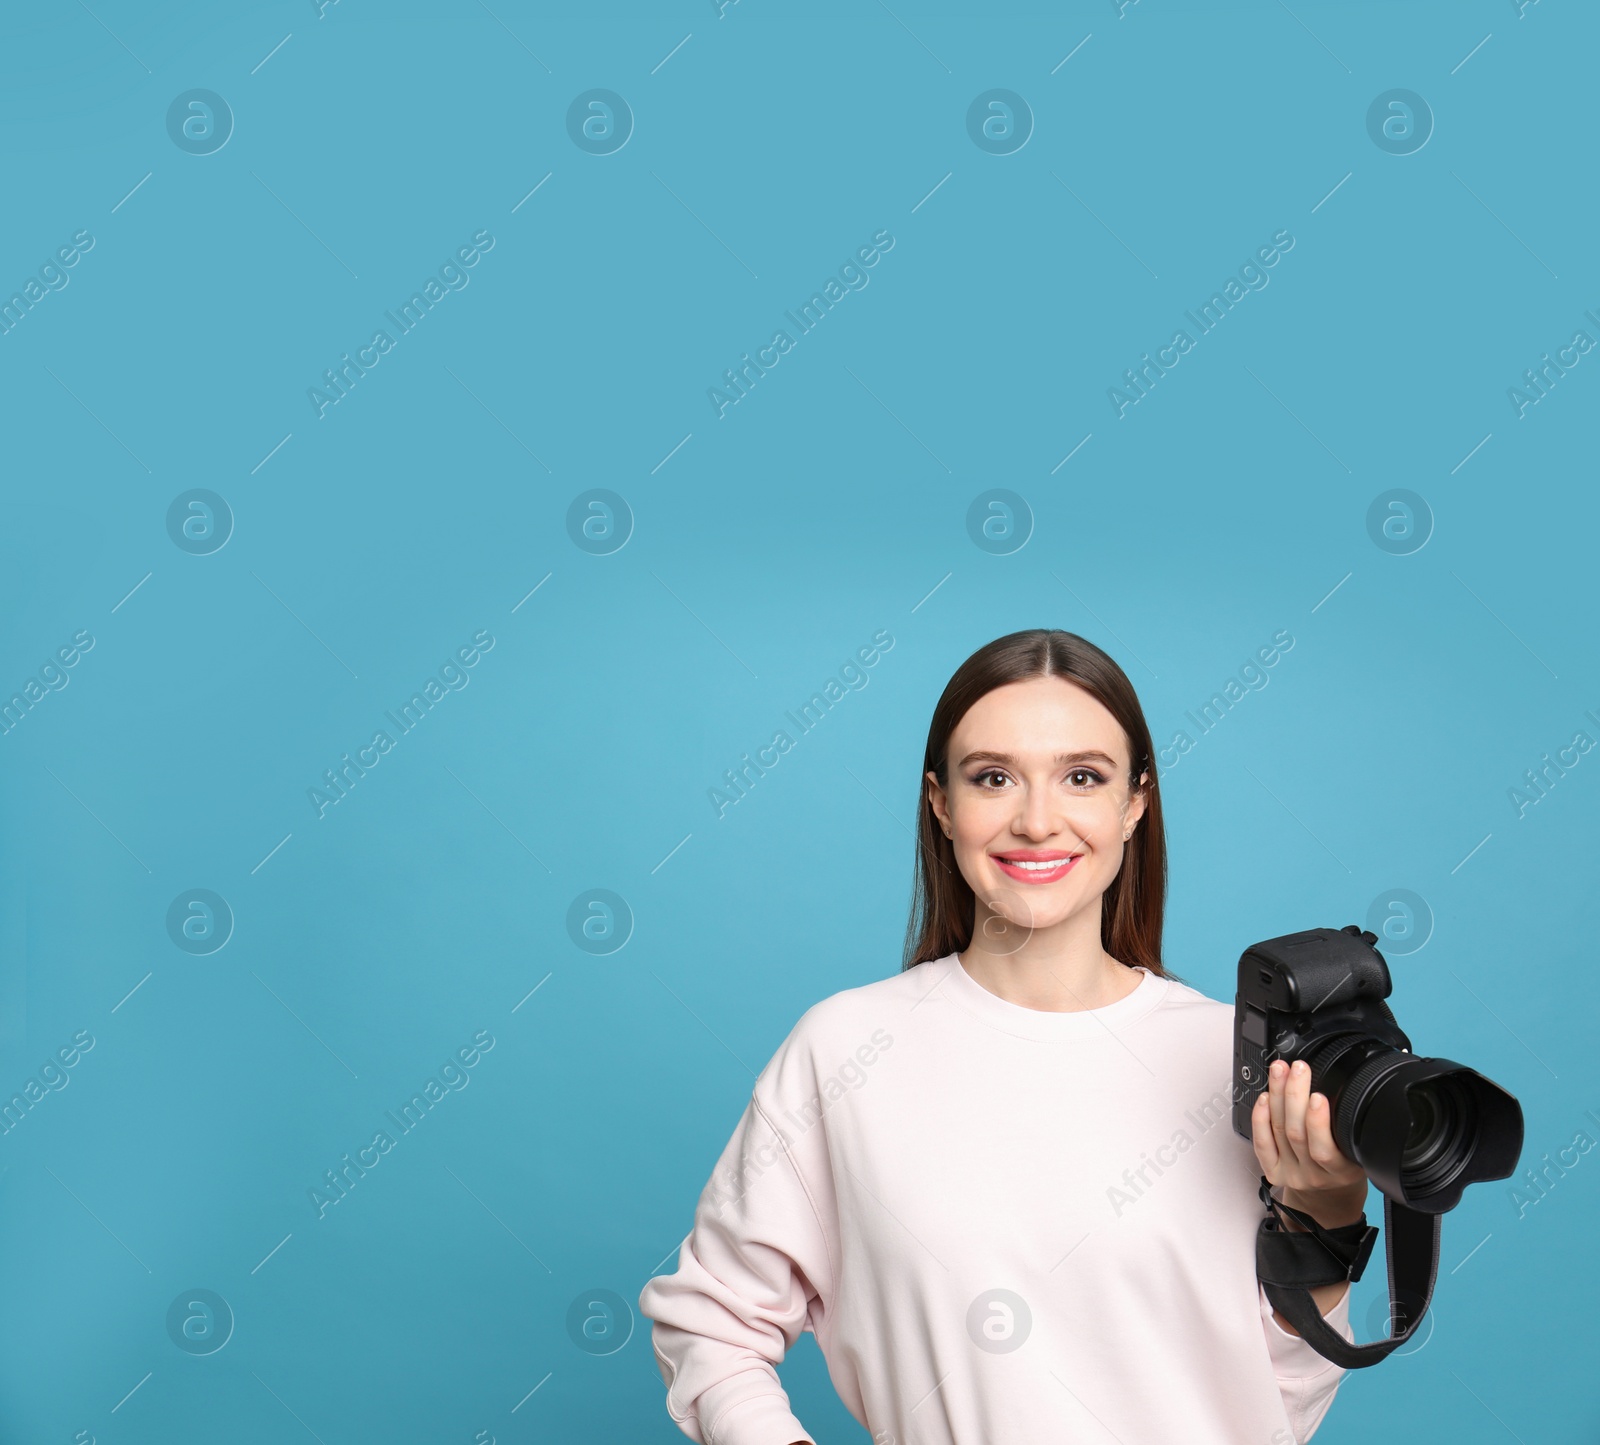 Photo of Professional photographer with modern camera on light blue background. Space for text